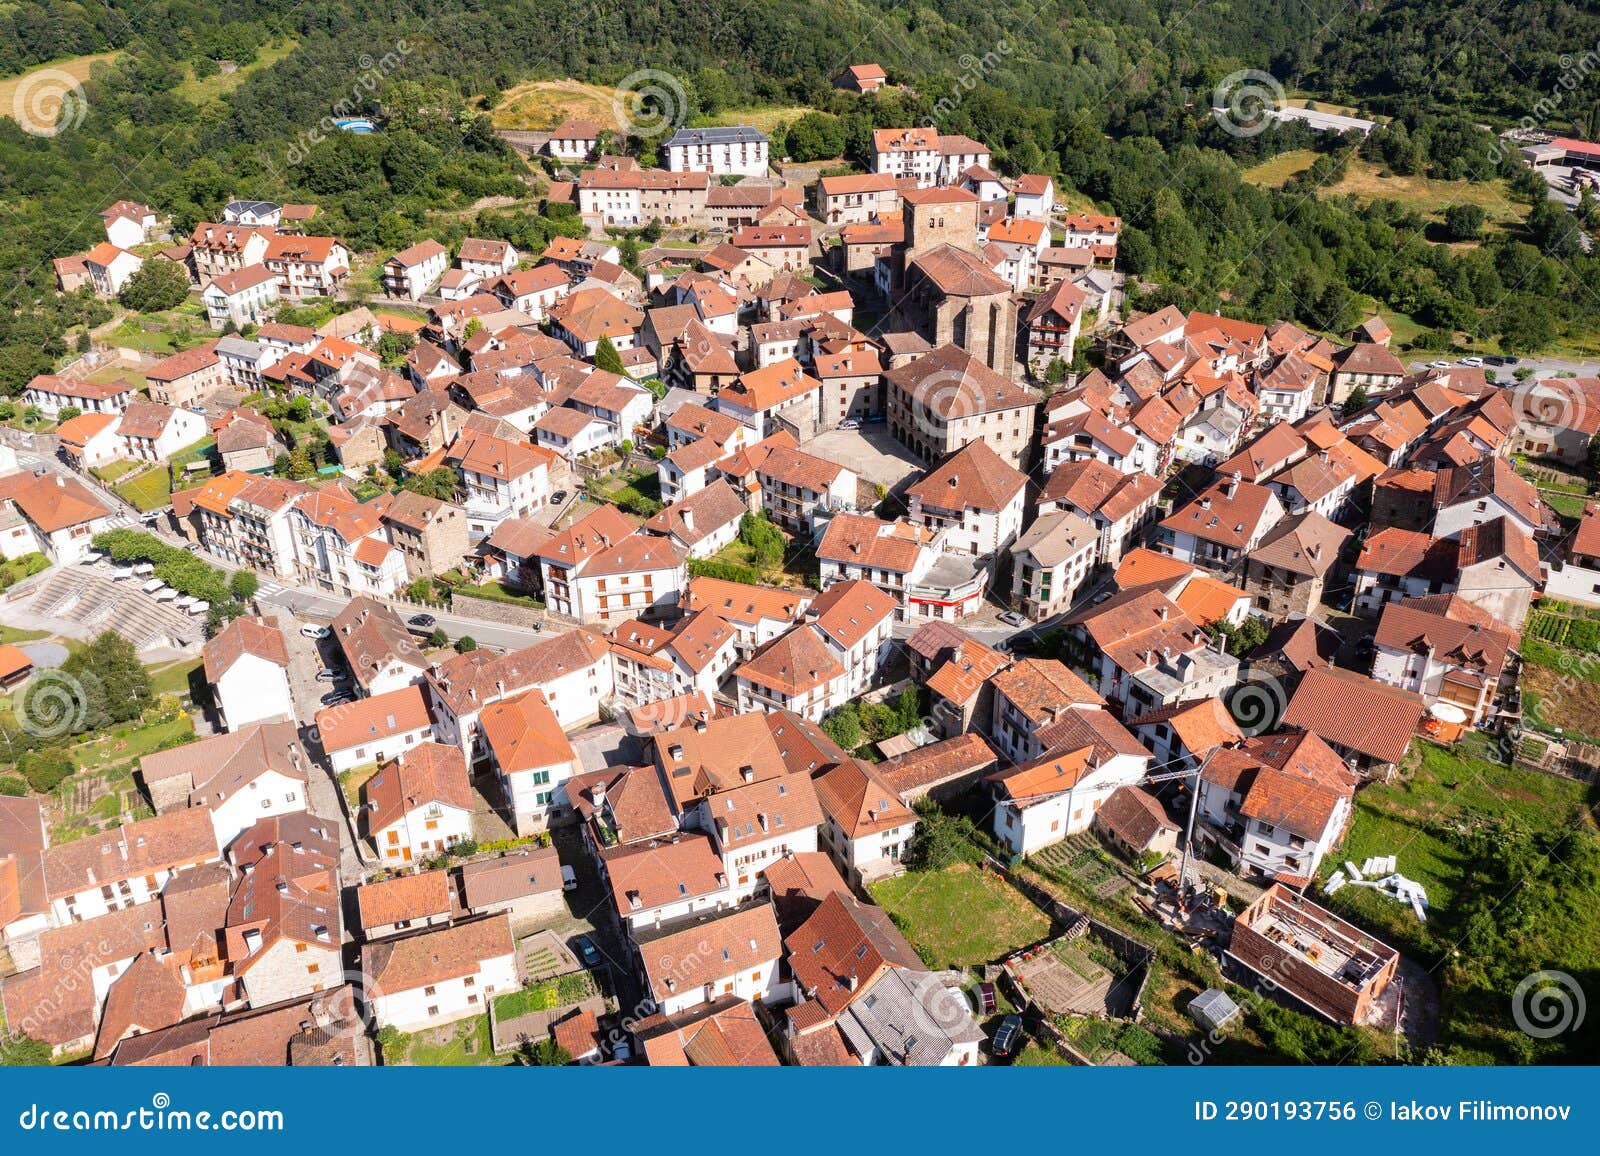 dense urban development of medieval spanish town of isaba, view from above.